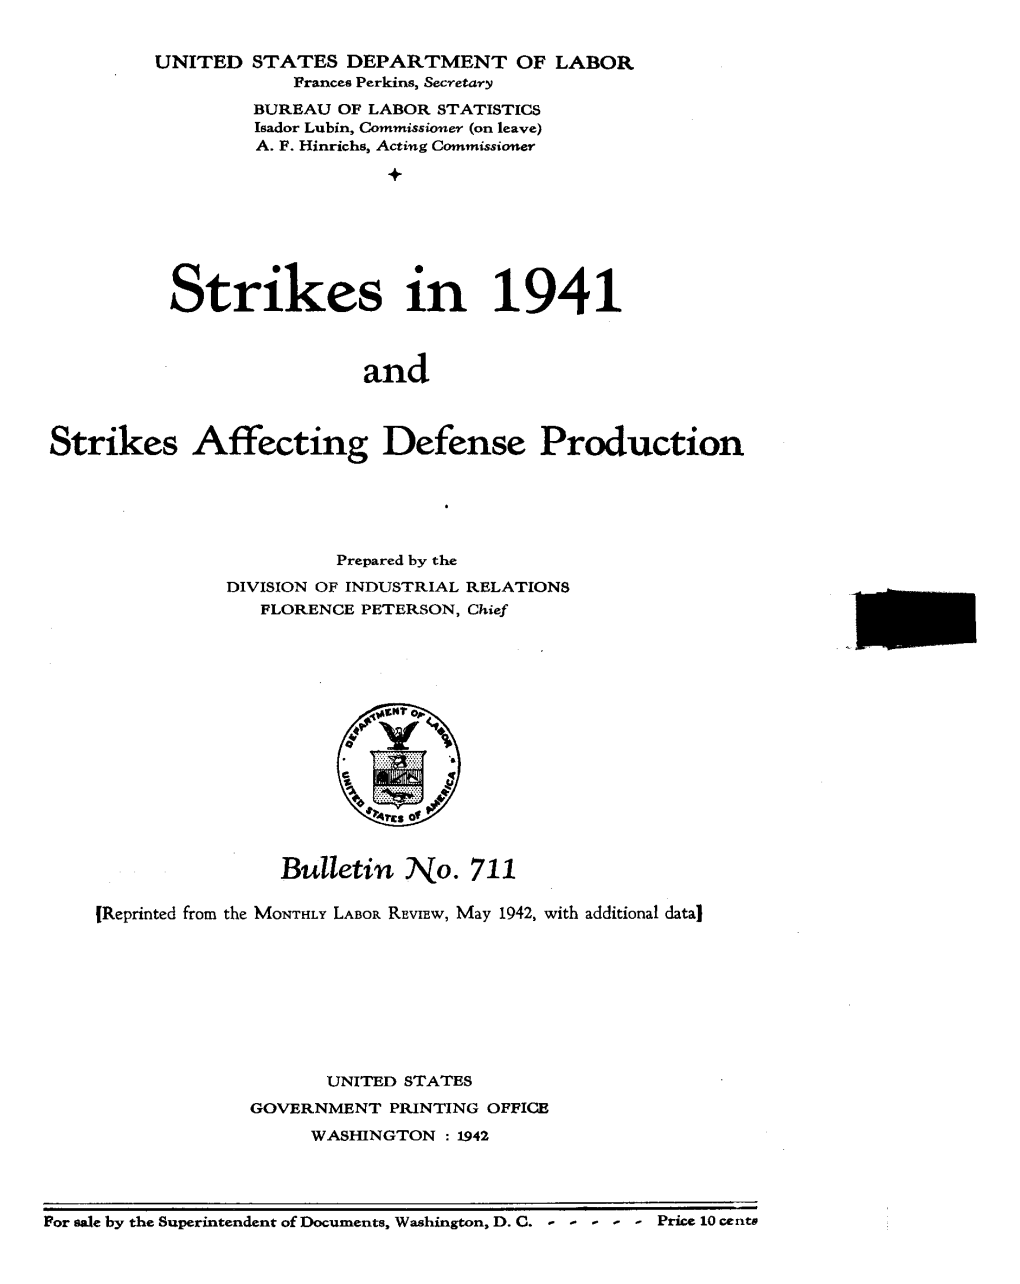 Strikes in 1941 and Strikes Affecting Defense Production